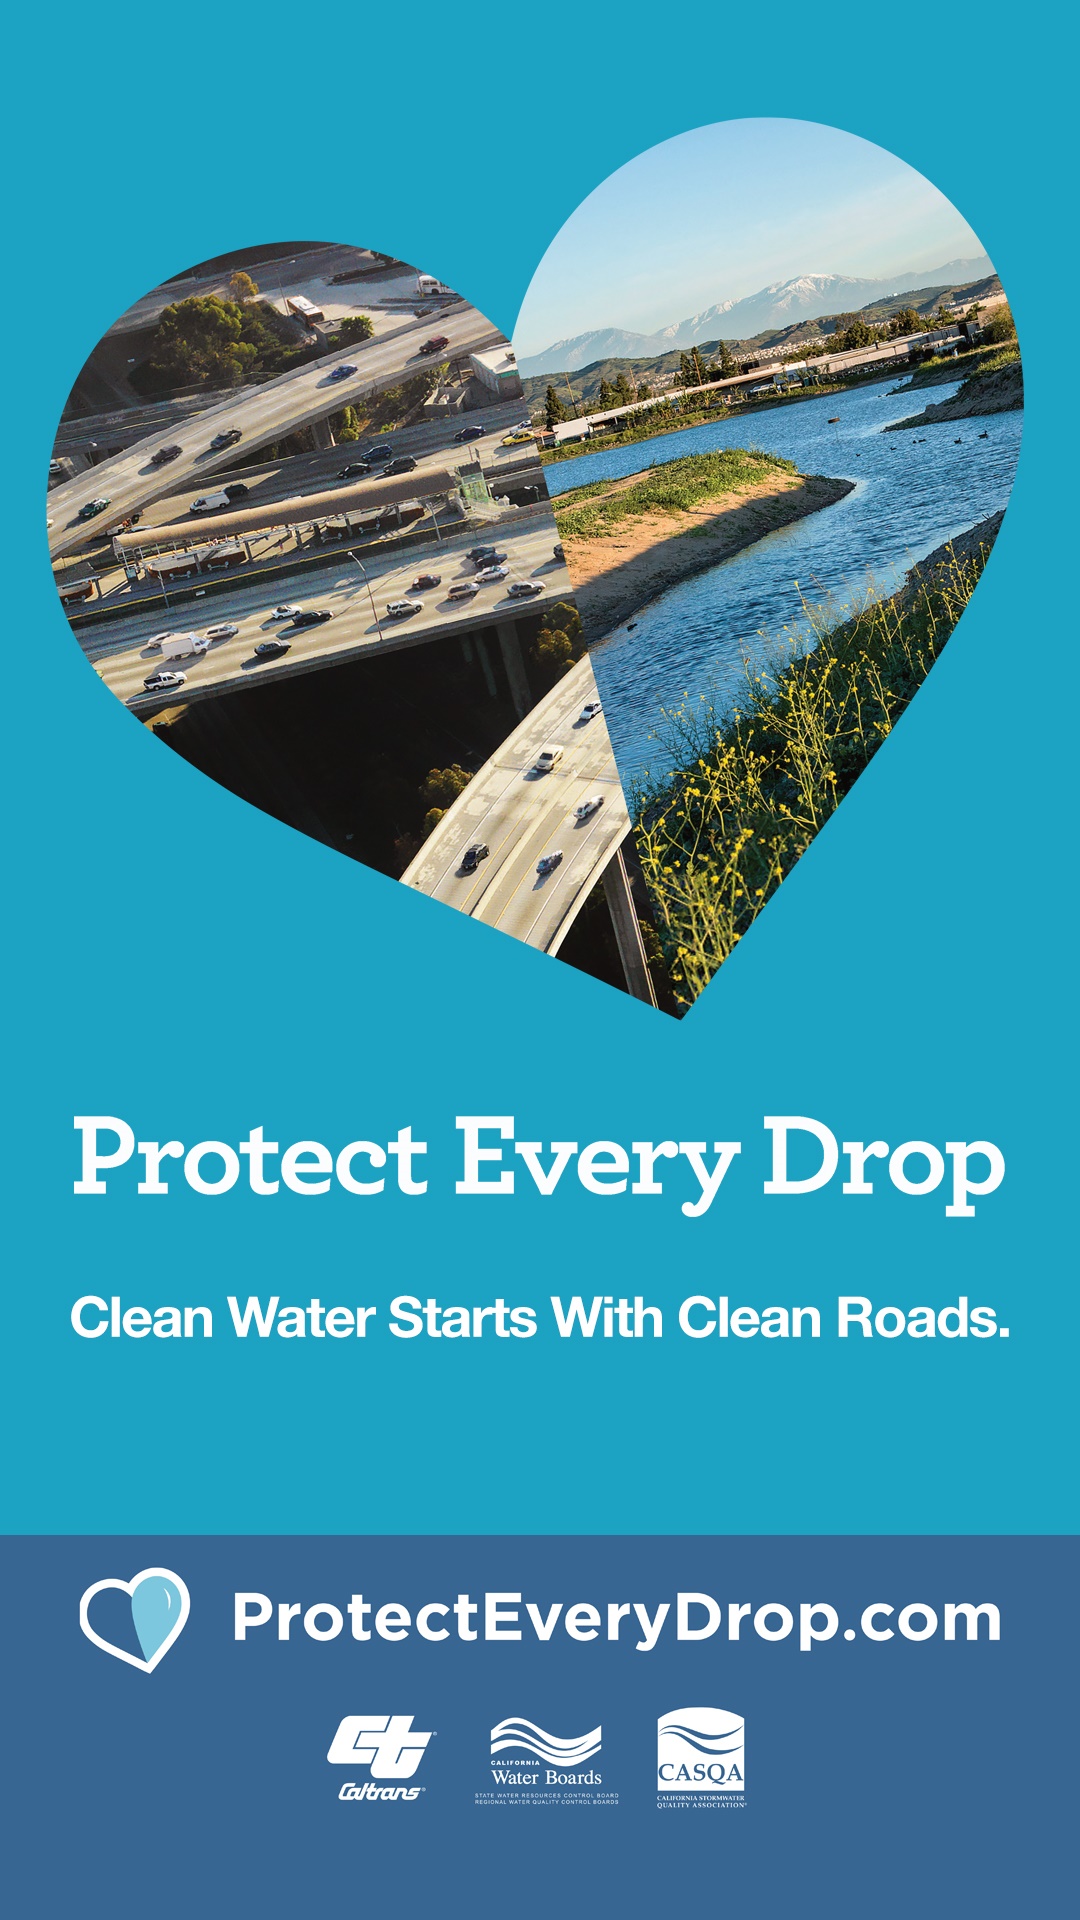 heart with water and road images, text reads clean water starts with clean roads